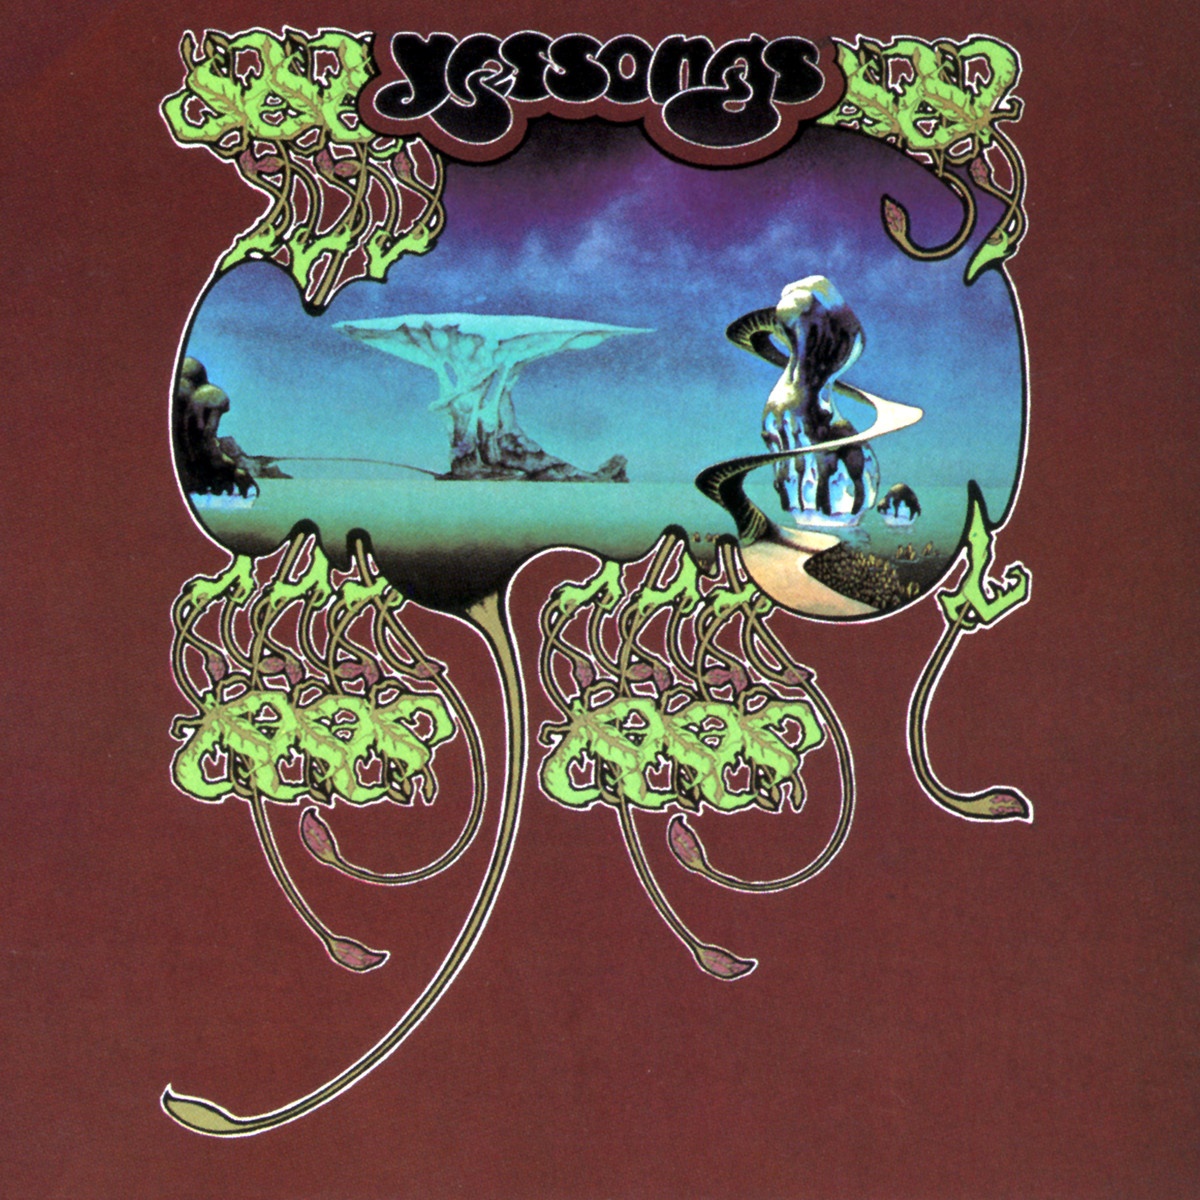 Close To The Edge (A. The Solid Time Of Change; B. Total Mass Retain; C. I Get Up I Get Down; D. Seasons Of Man) (Live LP Version From Yessongs)